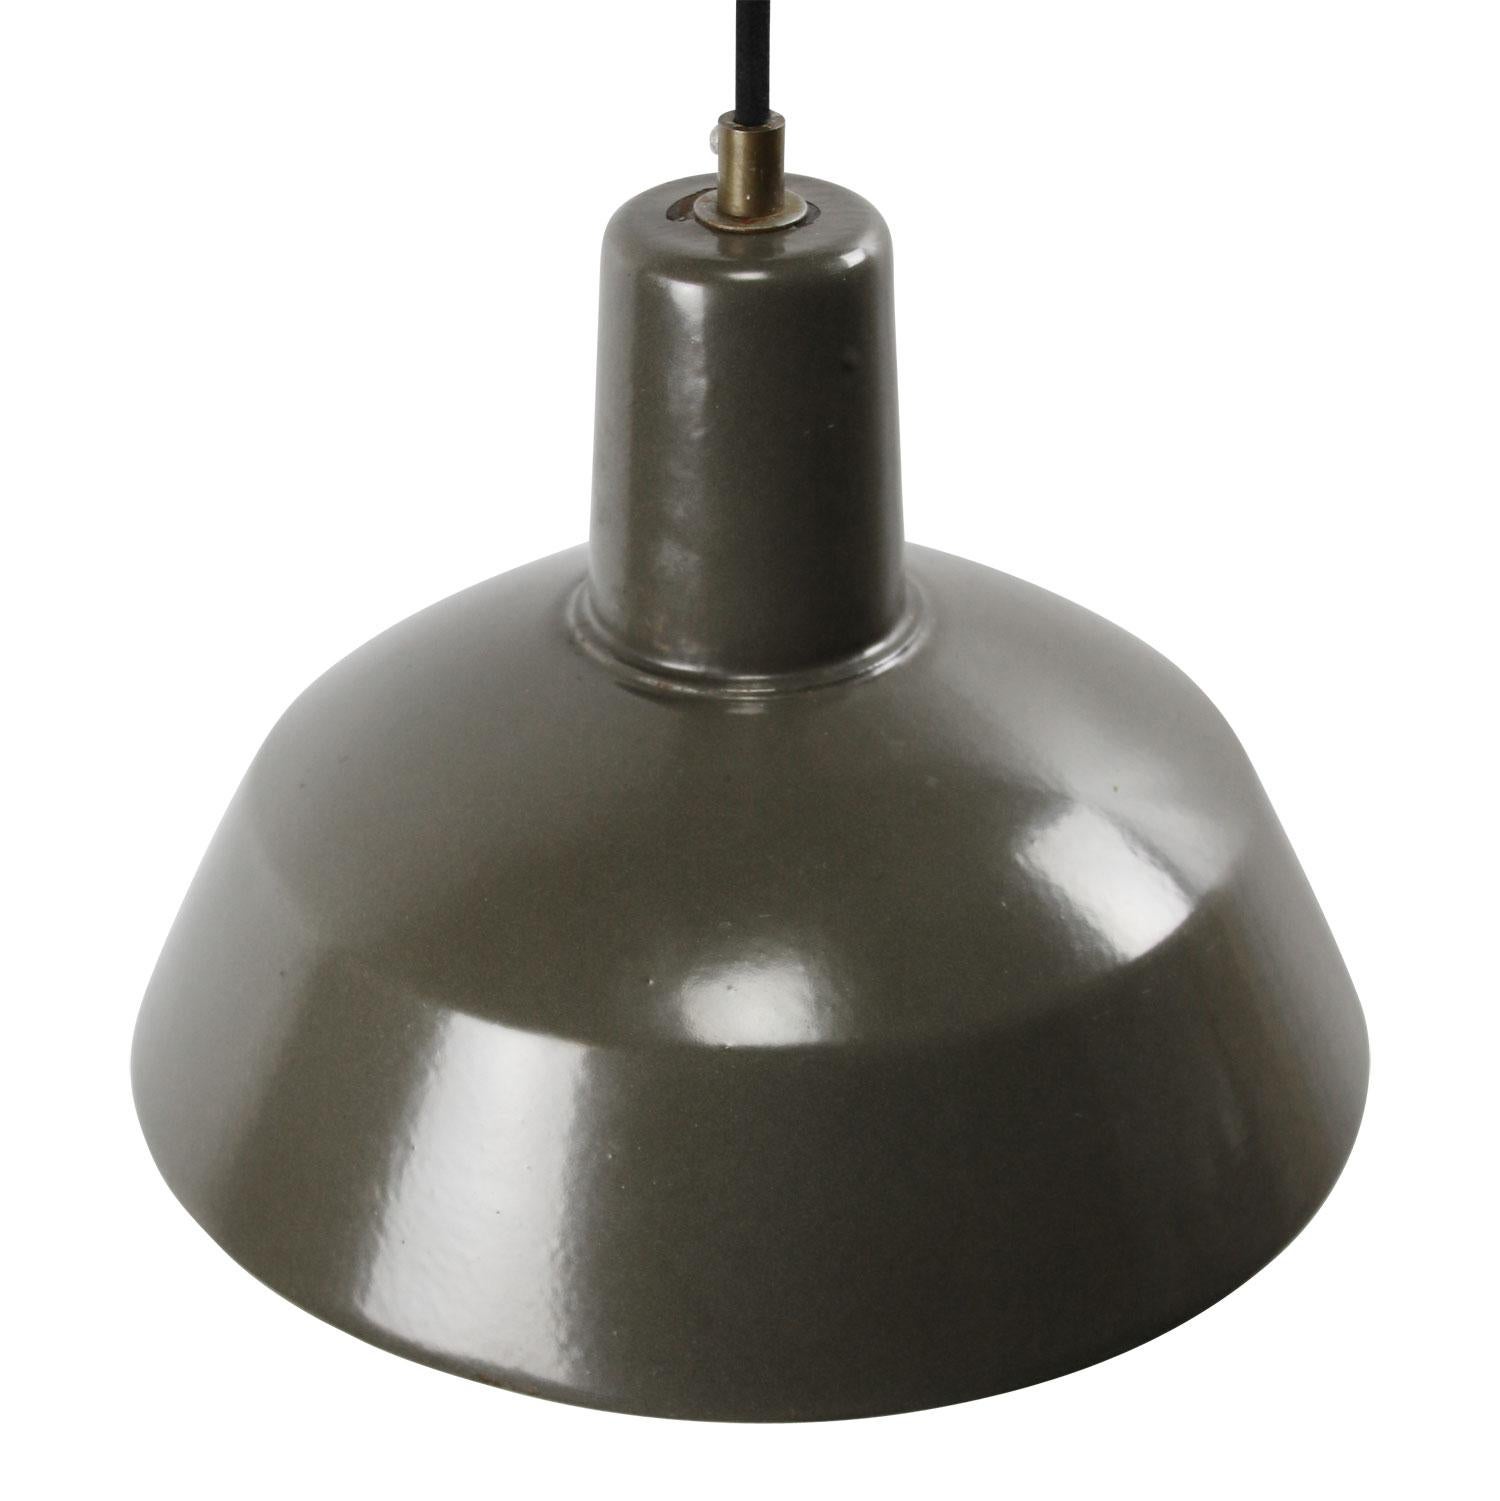 Small Industrial pendant
Brown enamel white interior
2 meter black cotton wire

Weight: 0.5 kg / 1.1 lb

Priced per individual item. All lamps have been made suitable by international standards for incandescent light bulbs, energy-efficient